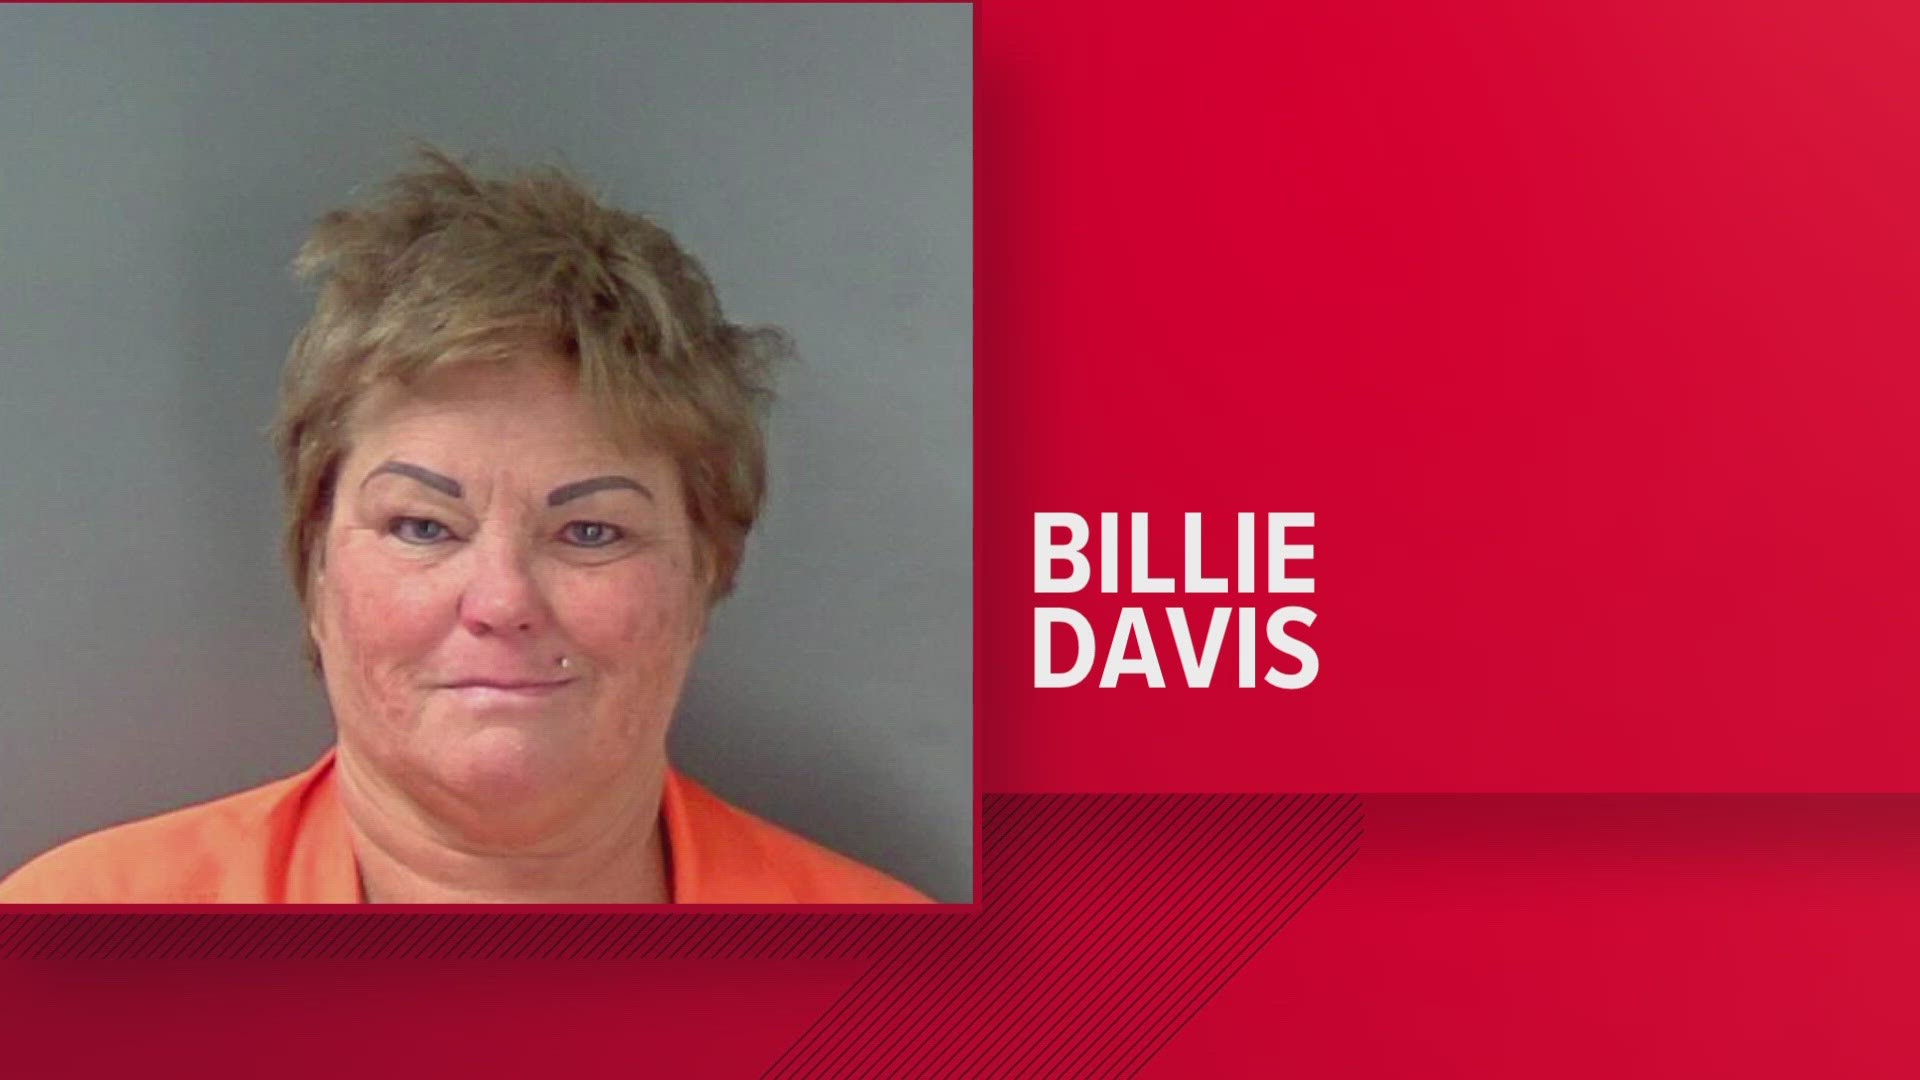 Billie Davis was indicted by a federal grand jury. The charge claims the attack was motivated by the victim's race and national origin.